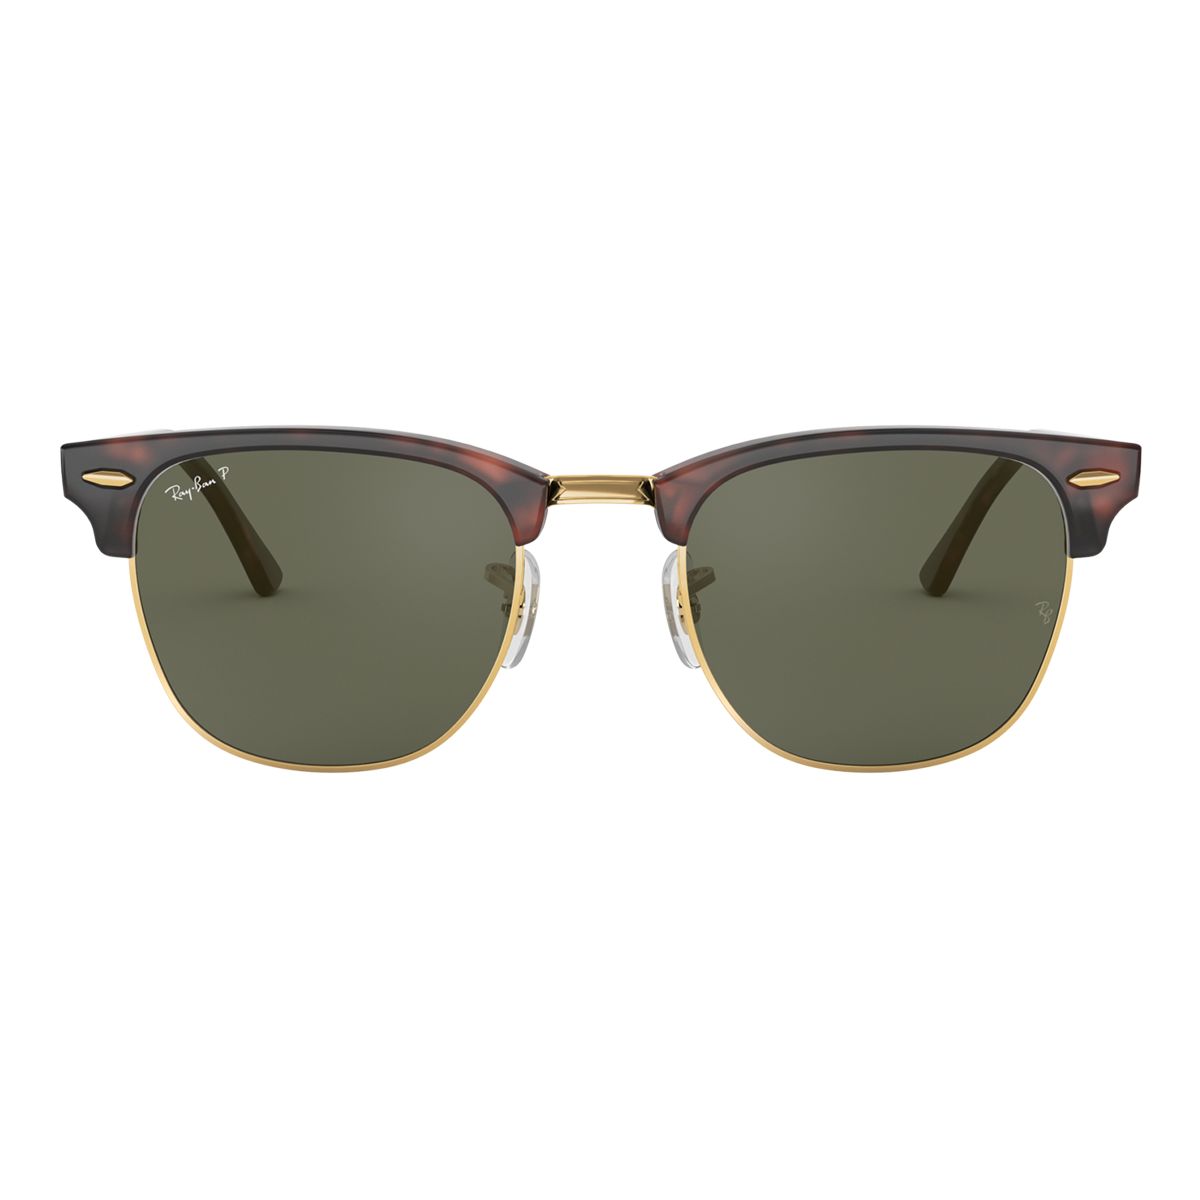 Image of Ray Ban Men's/Women's Clubmaster Browline Sunglasses Polarized